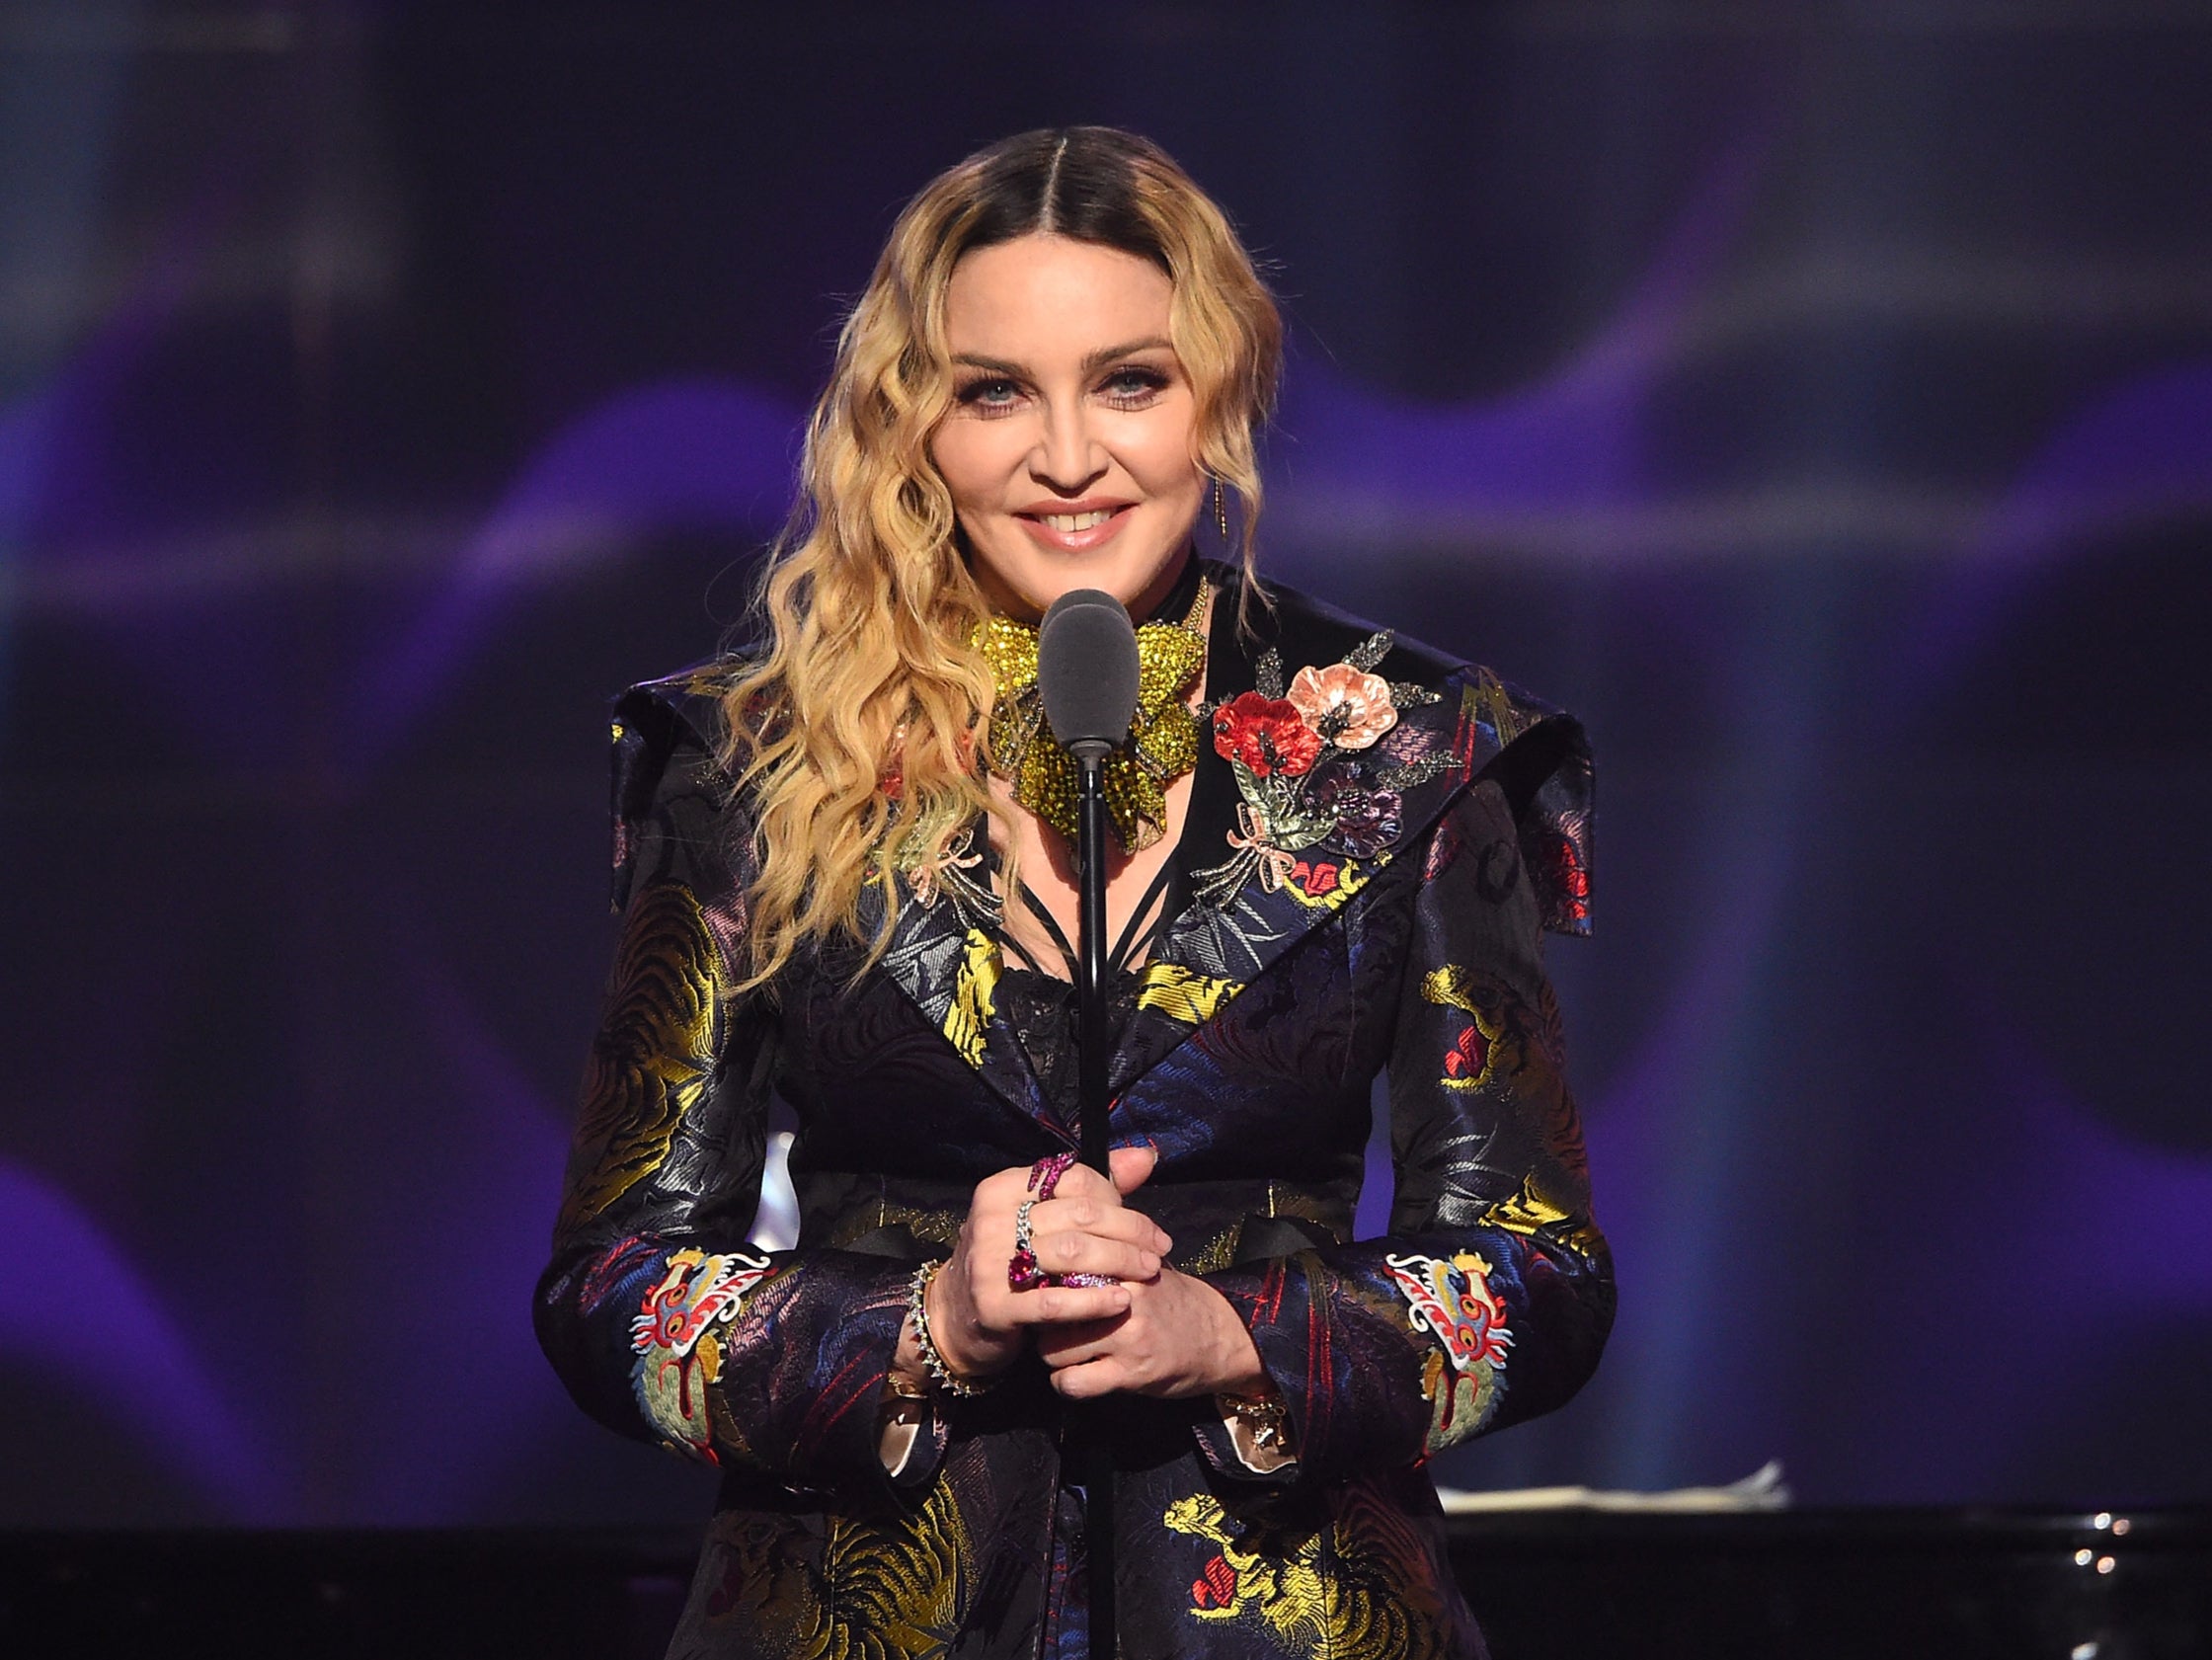 Madonna is currently performing on her ‘Celebration’ tour